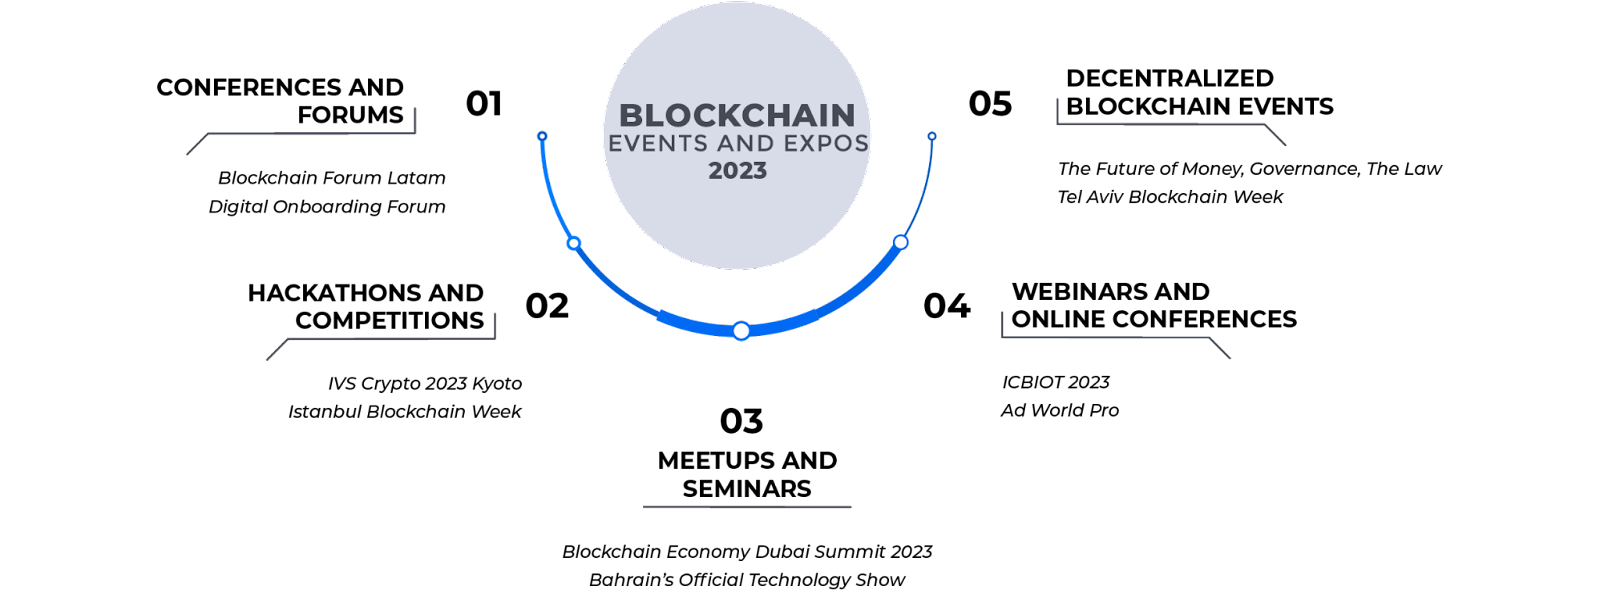 Types blockchain events and expos 2023